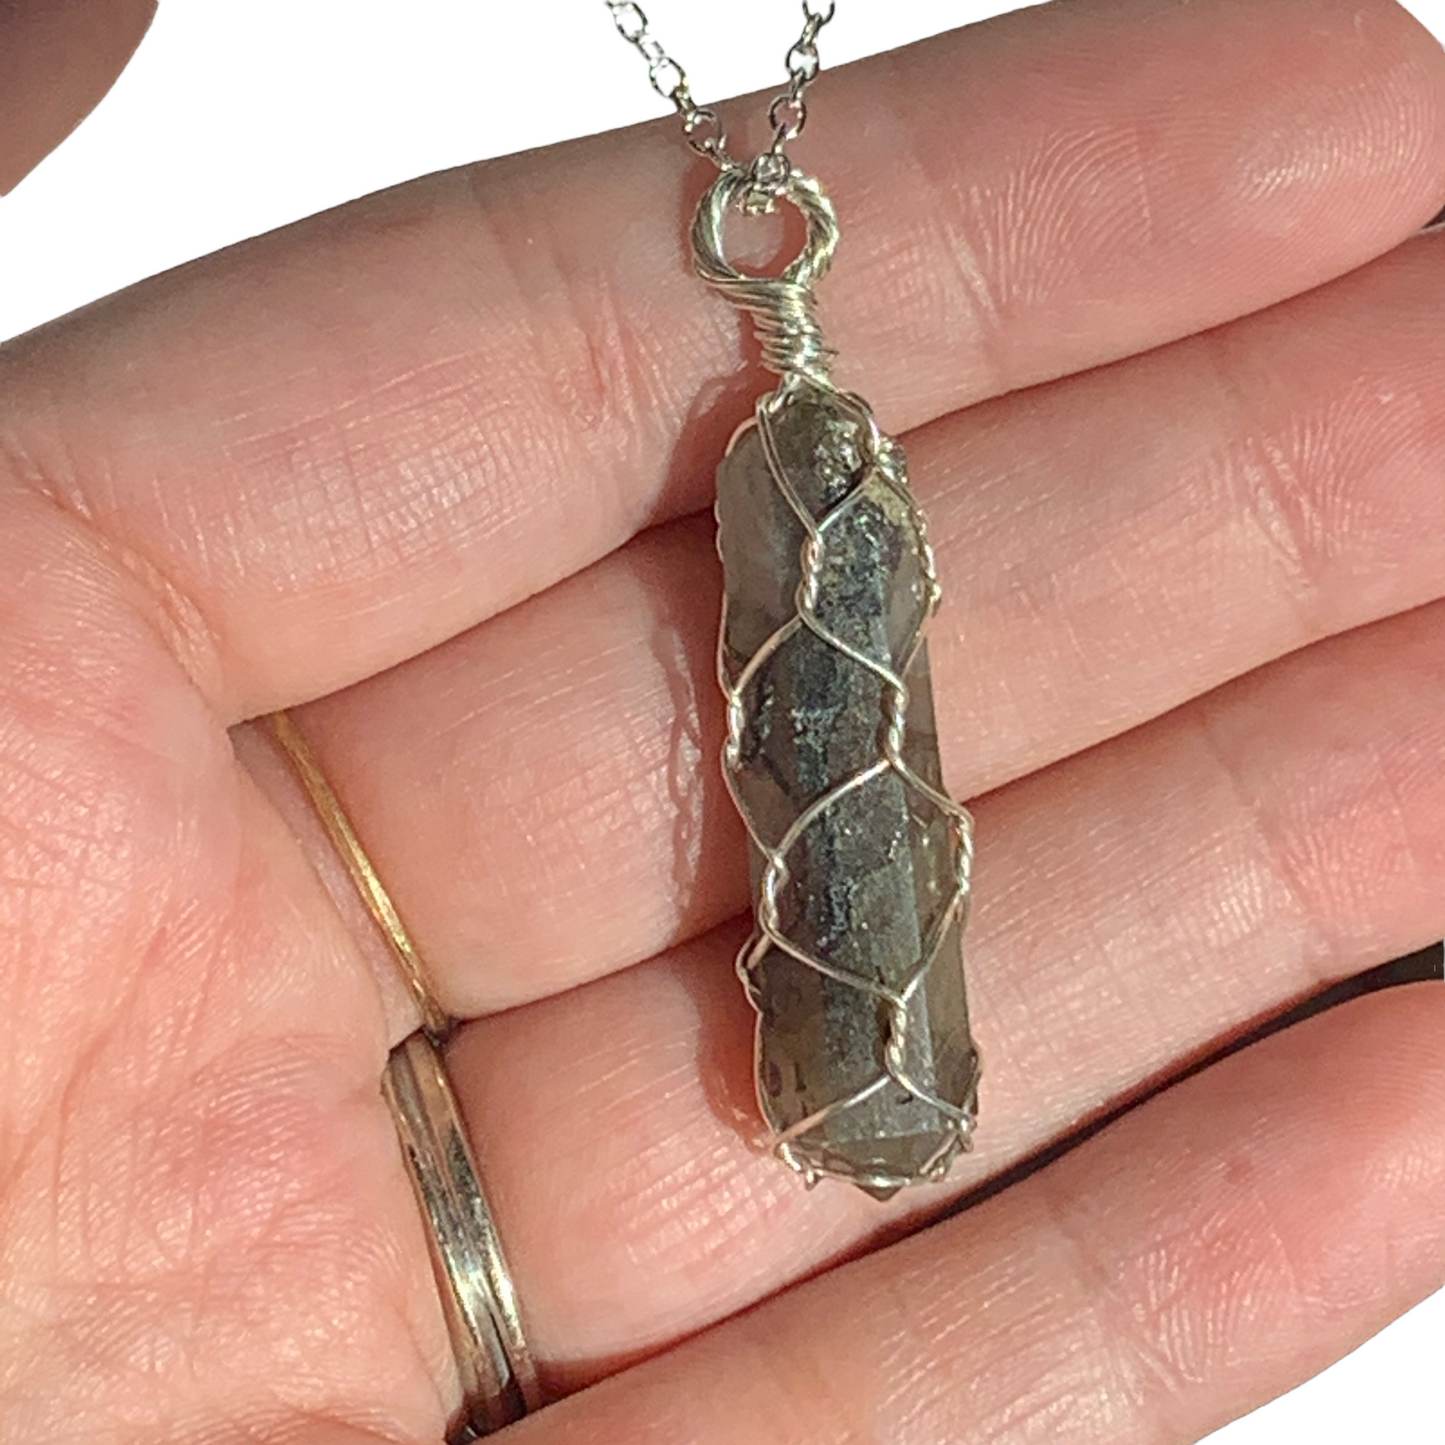 Sterling Silver | 14 KT Gold Filled Labradorite Wire Wrapped Caged Pendant